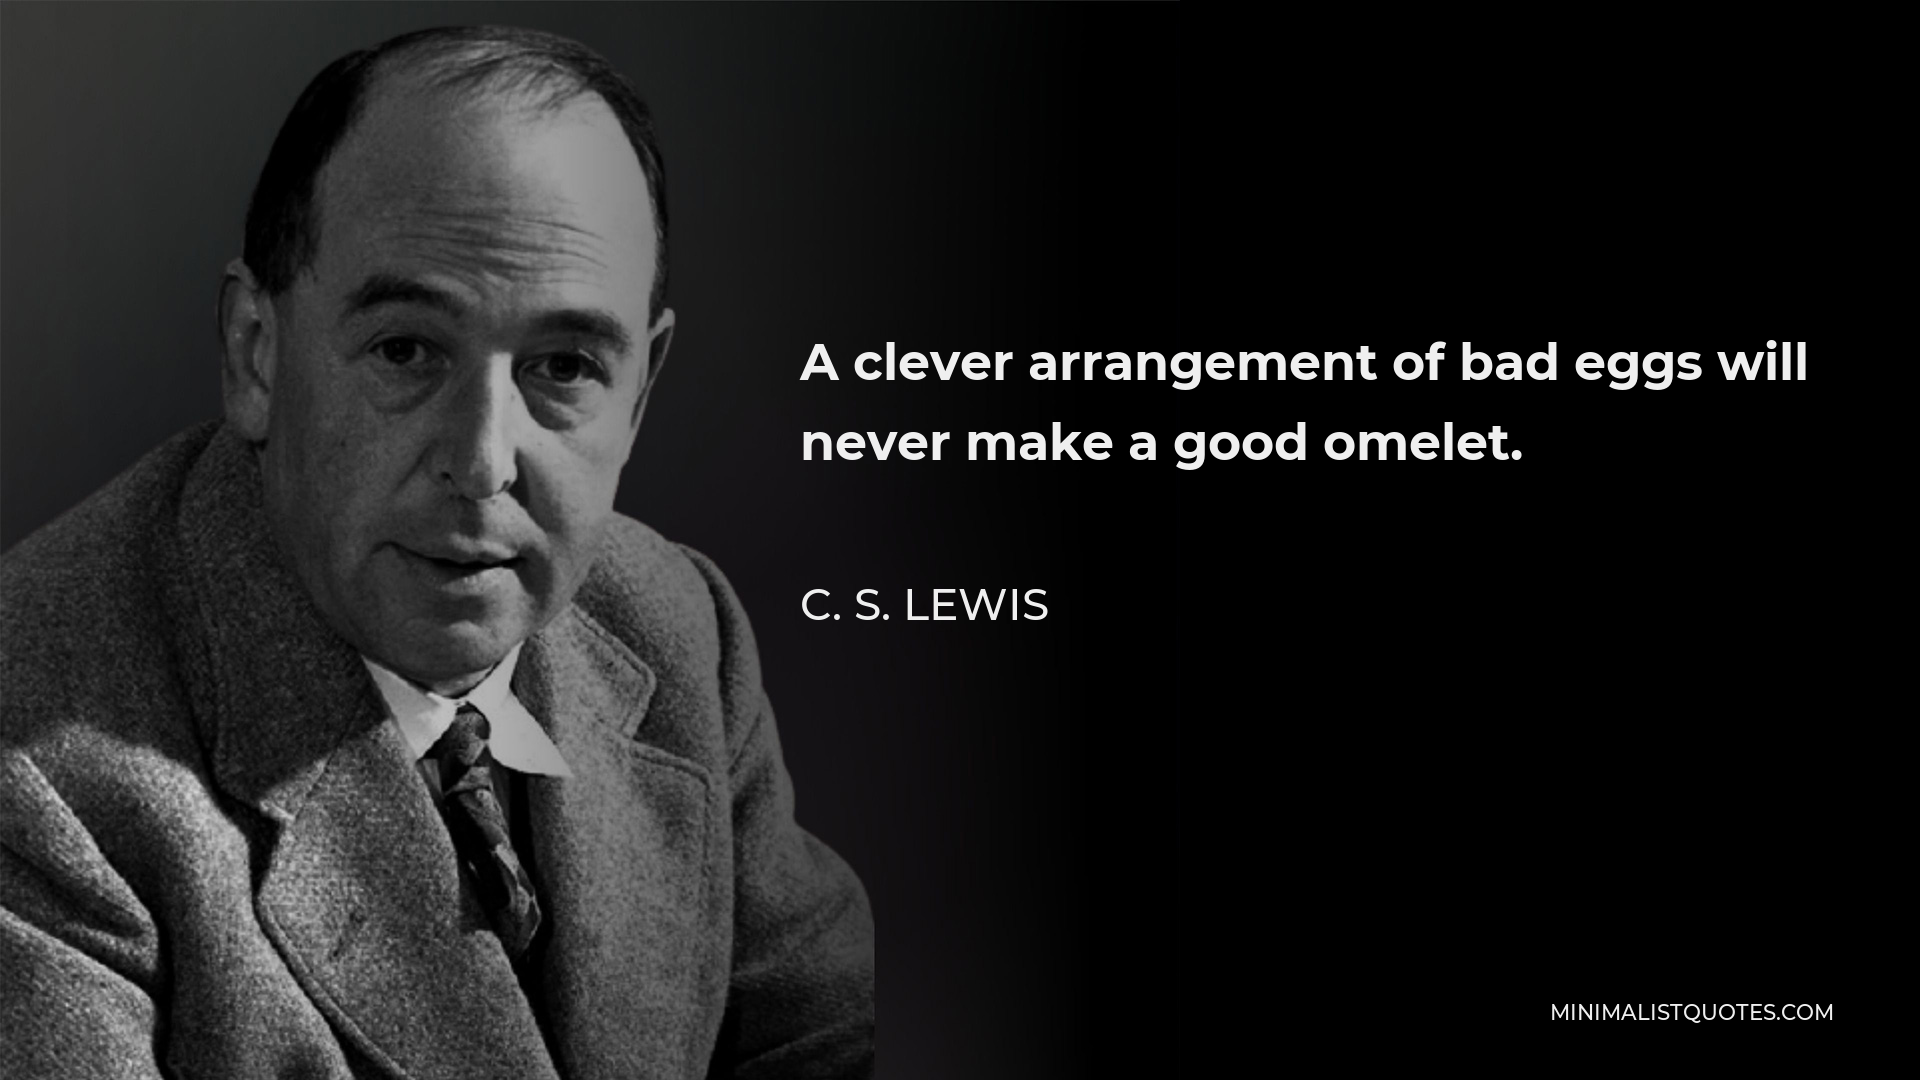 C. S. Lewis Quote - A clever arrangement of bad eggs will never make a good omelet.